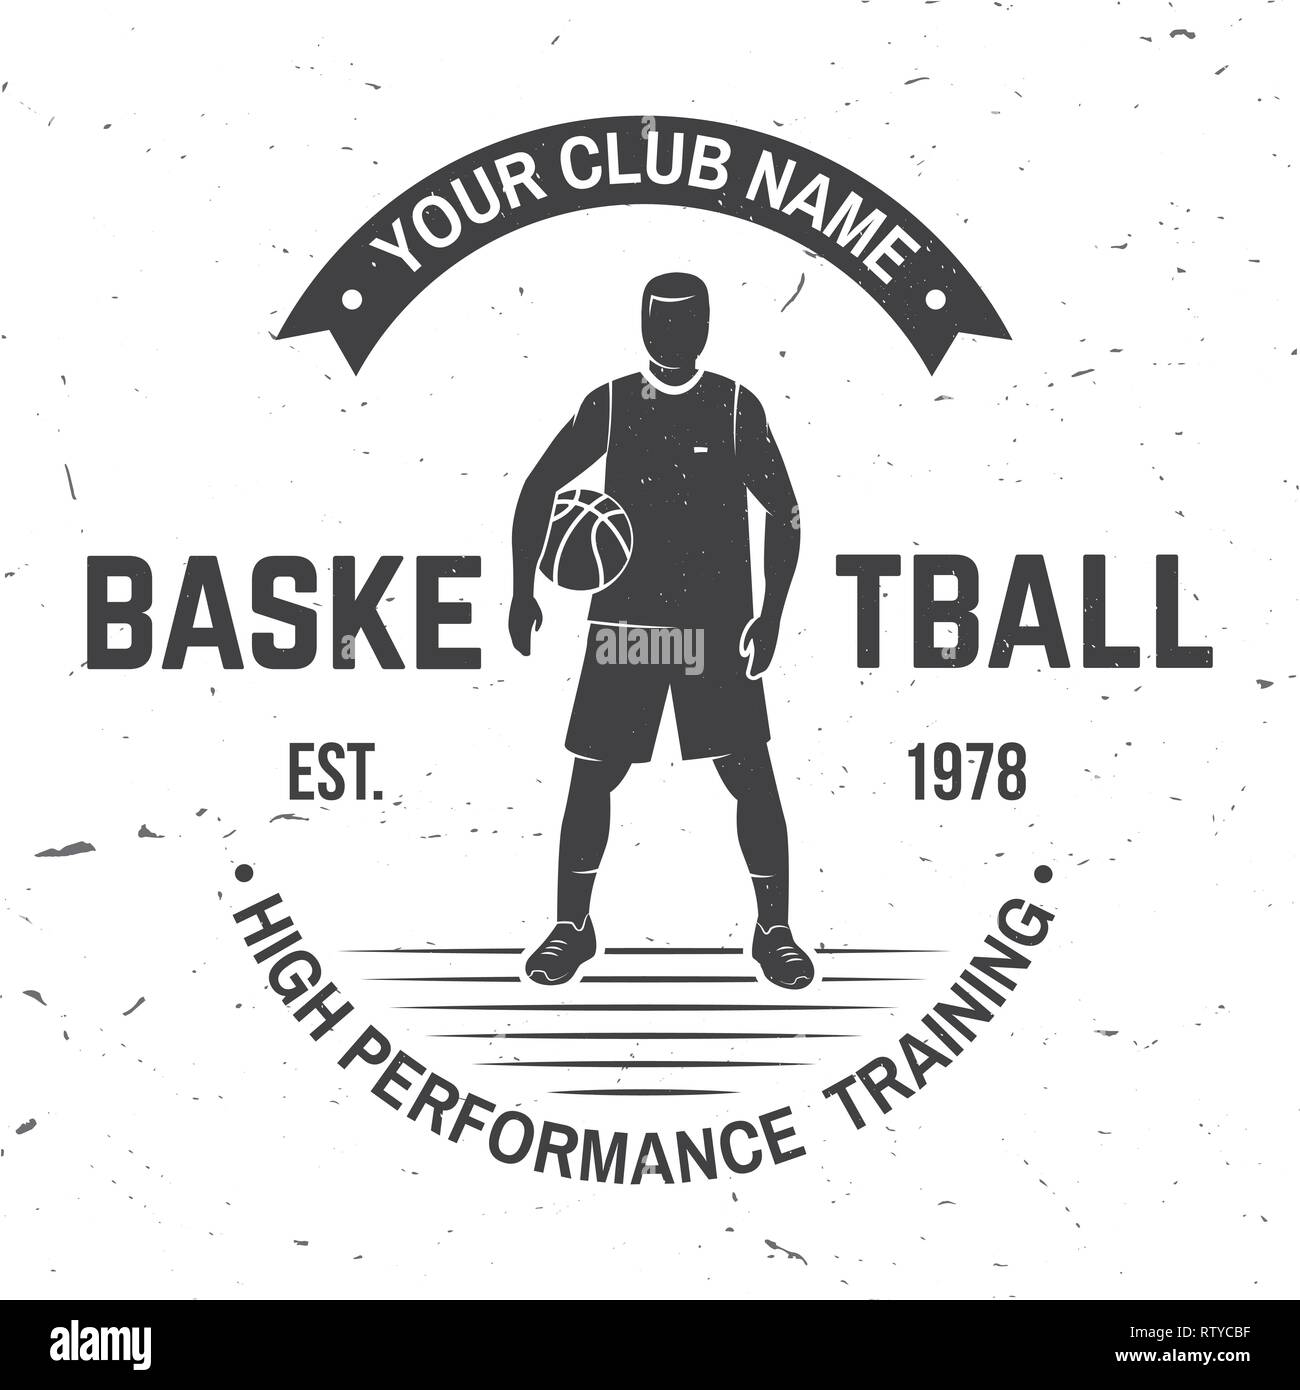 Basketball club badge. Vector illustration. Concept for shirt, print, stamp or tee. Vintage typography design with basketball player and basketball ball silhouette Stock Vector